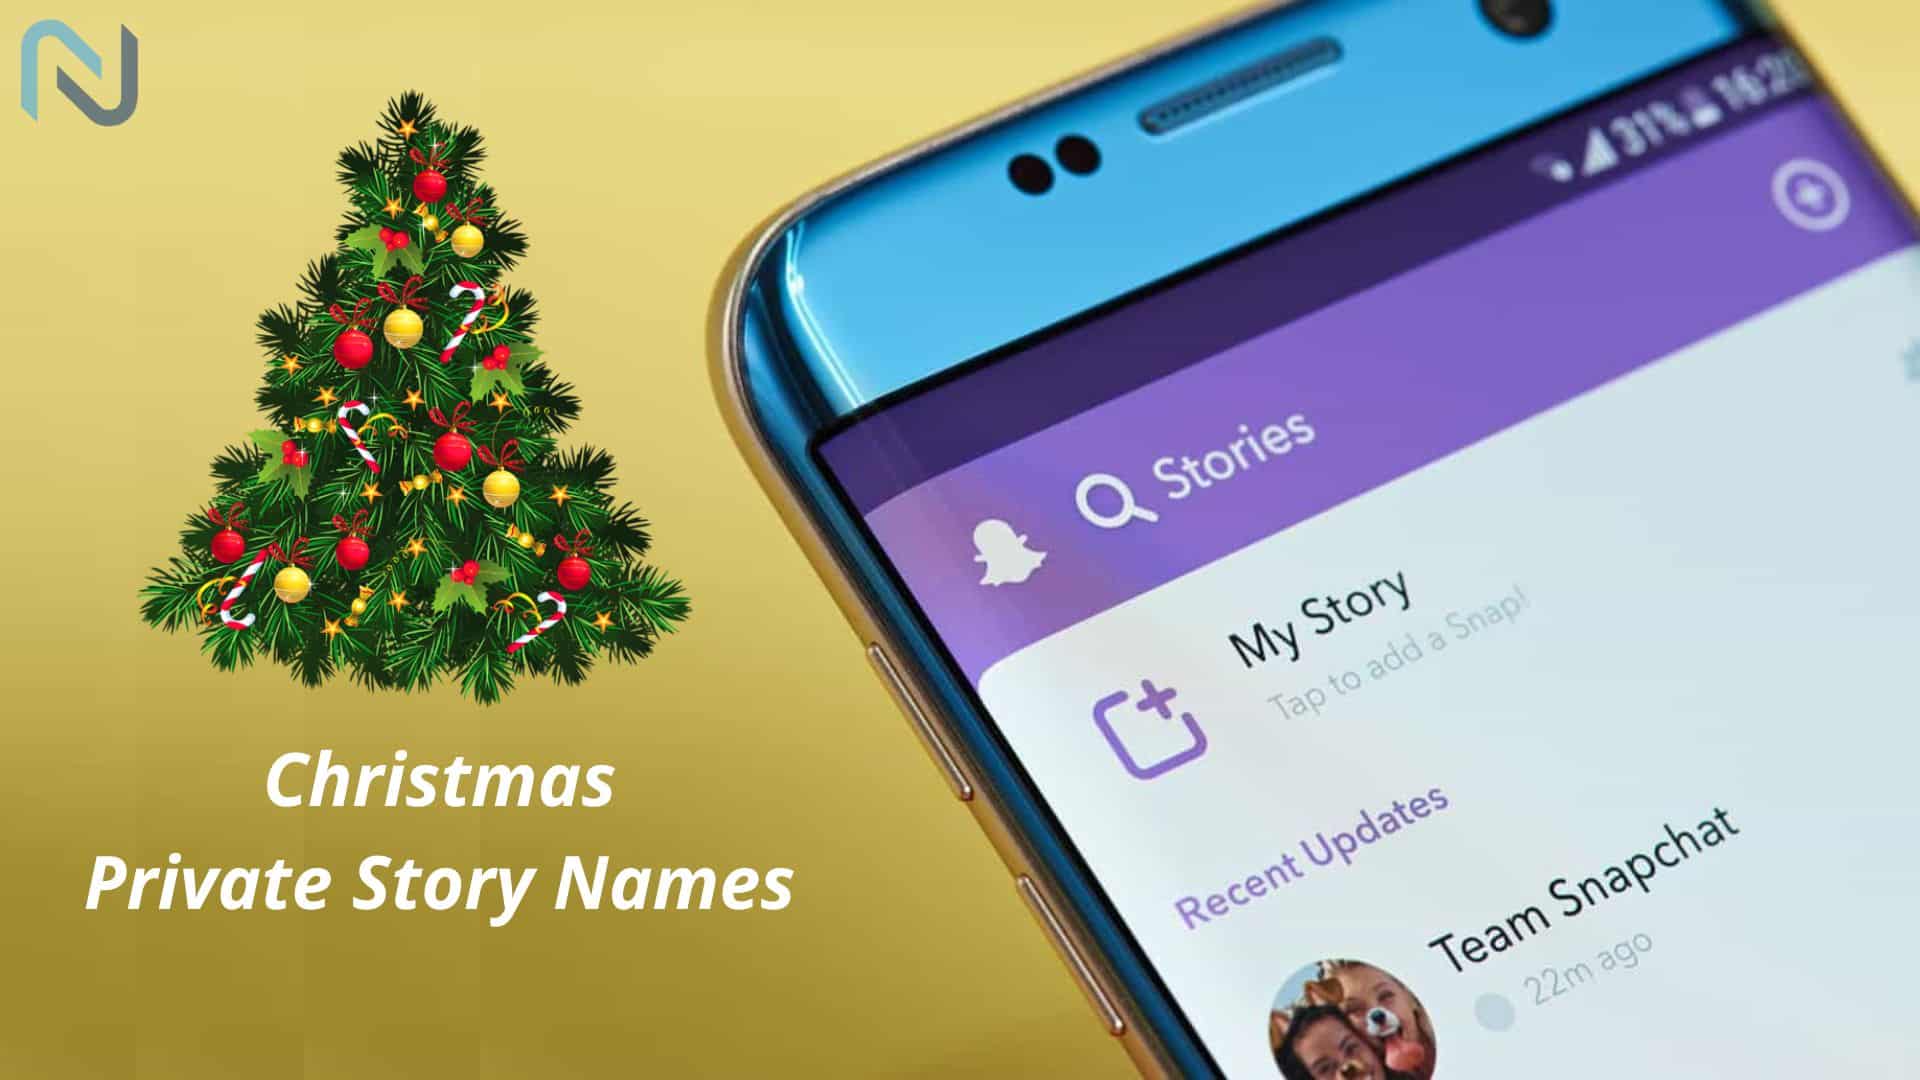 Christmas Private Story Names